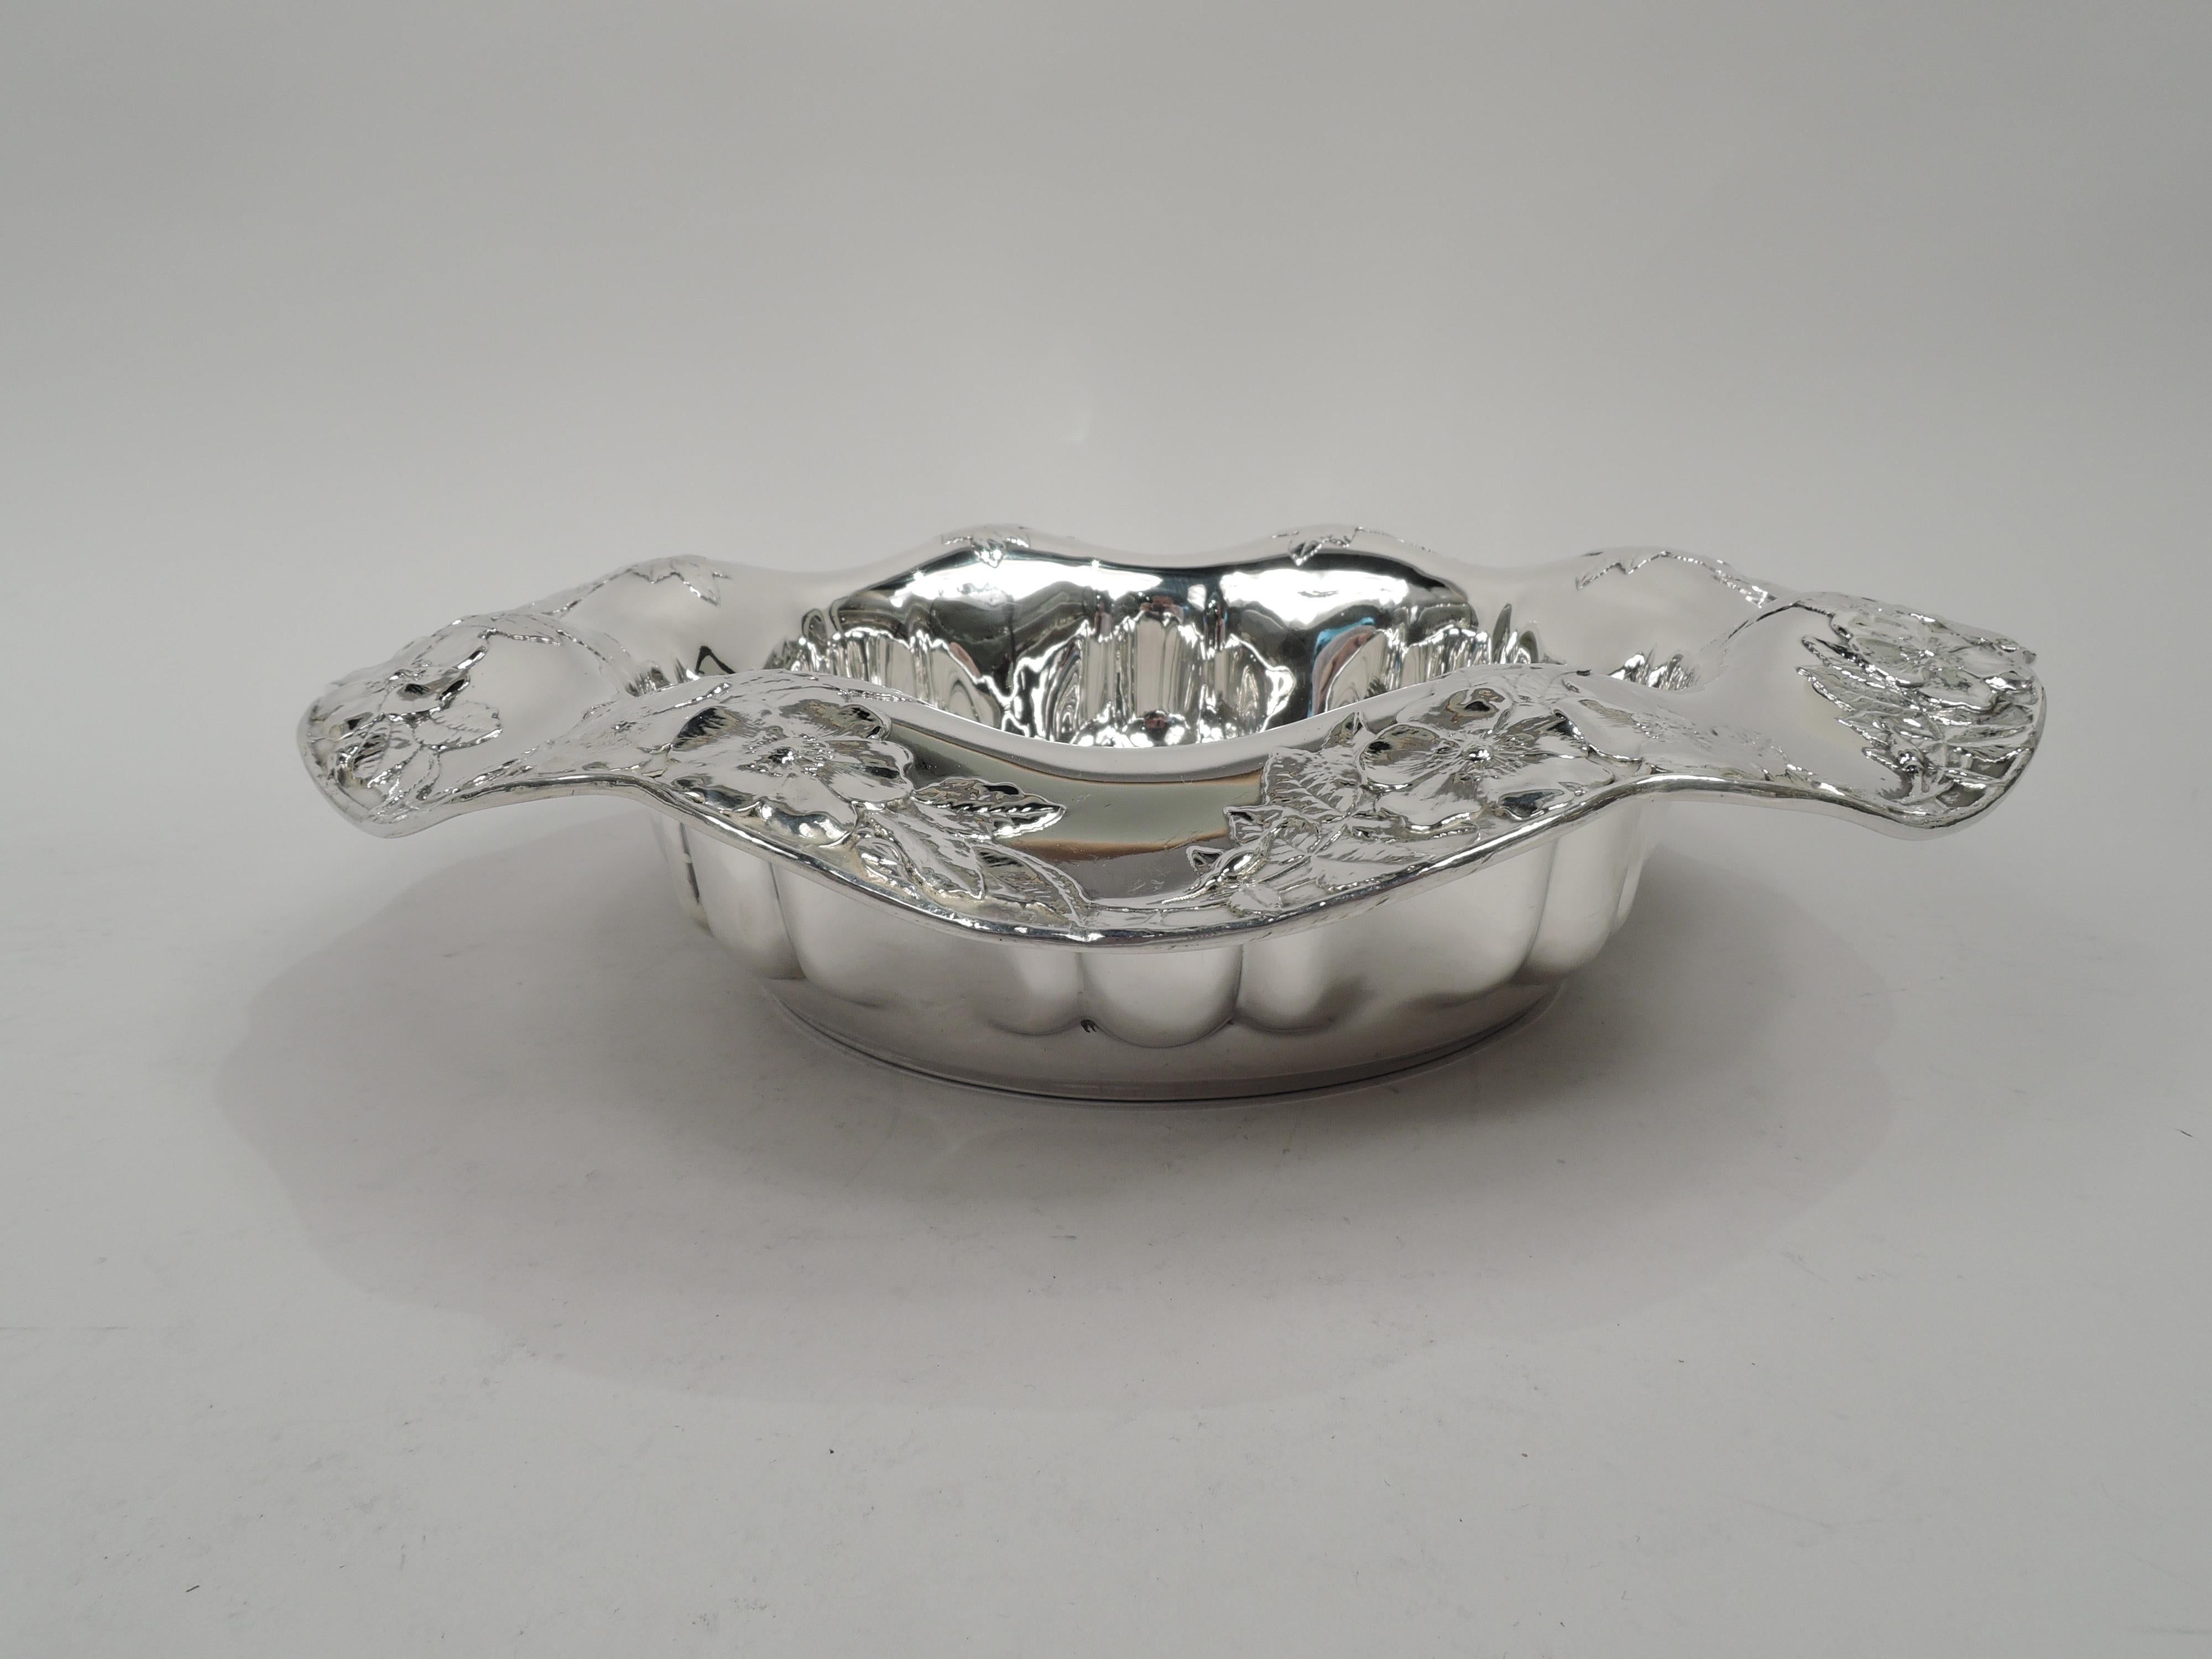 Edwardian Art Nouveau sterling silver bowl. Made by Tiffany & Co. in New York, ca 1910. Round well with embossed abstract egg-and-dart border. Wavy and scalloped rim with applied flowers and leaves. Fully marked including maker’s stamp, pattern no.